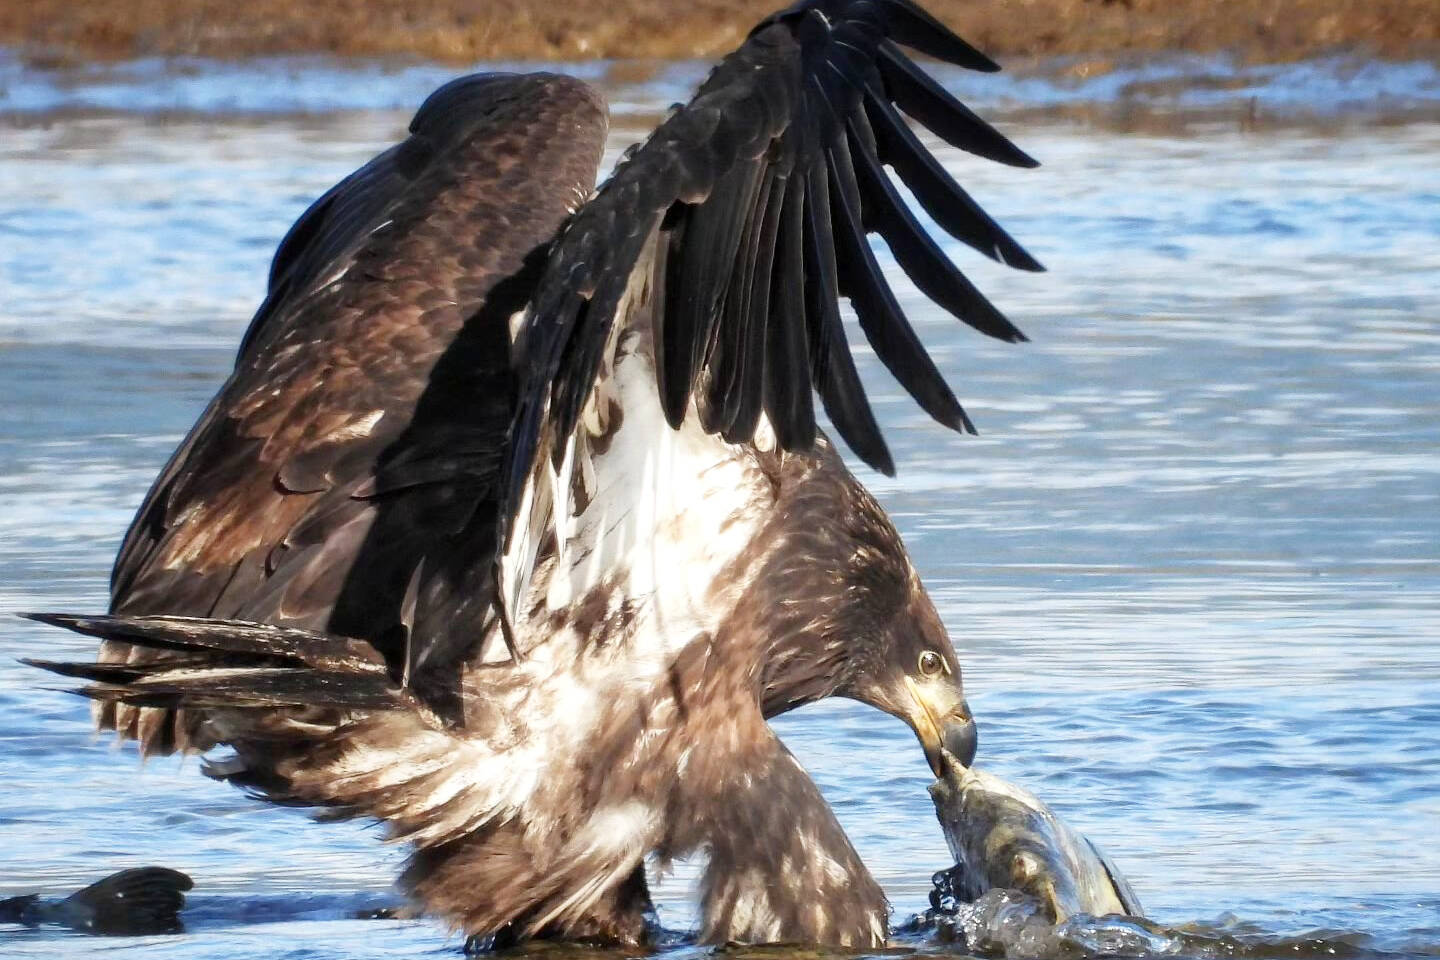 Thousands of bald eagles arrive in Harrison Mills to feast on pink salmon in the Harrison River. The Harrison River is among the most productive pink salmon areas in Canada. (Photo/Tourism Harrison)